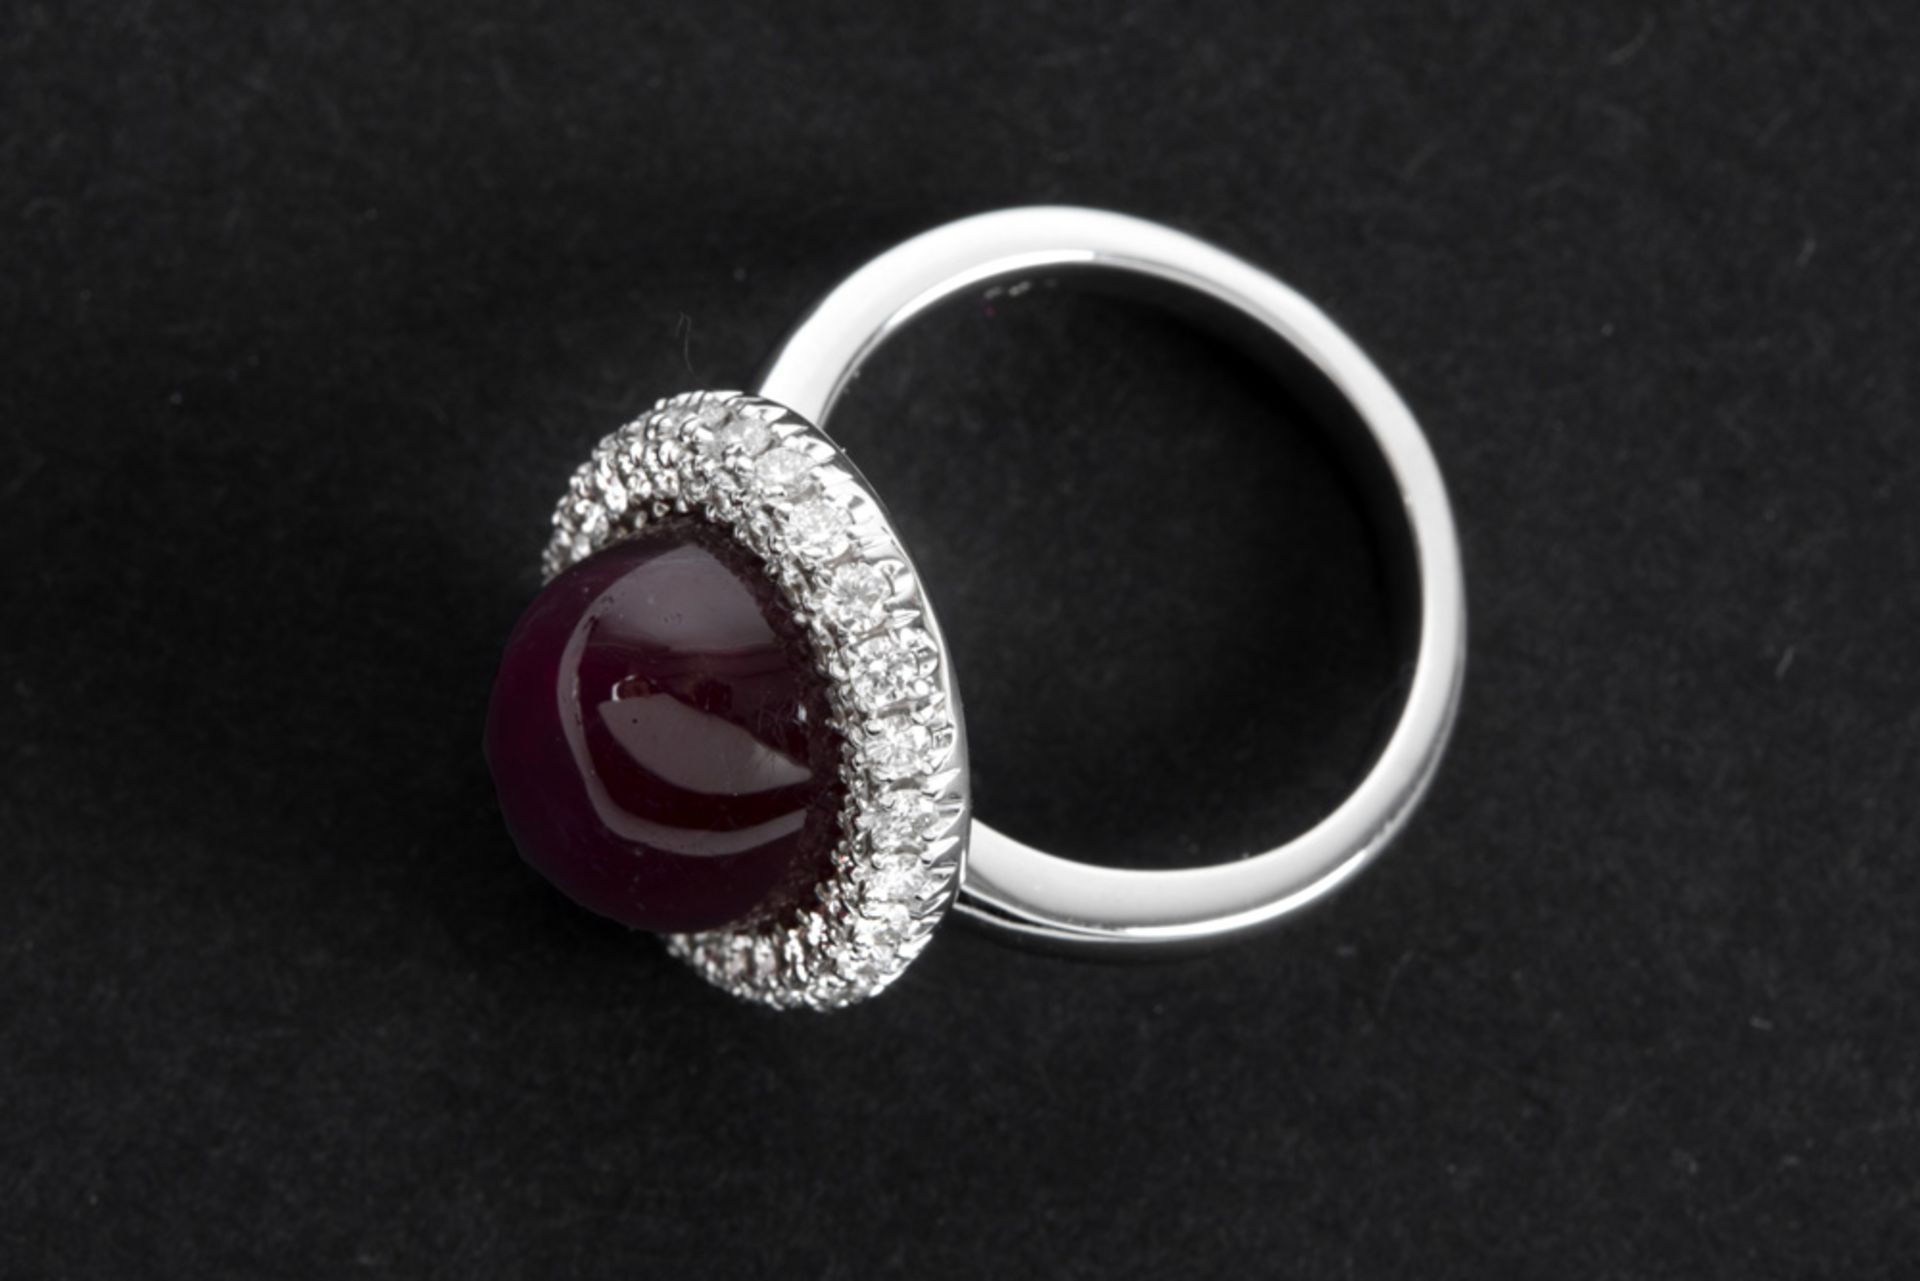 handmade ring in white gold (18 carat) with a treated cabochon cut ruby of more than 14 carat - Image 2 of 2